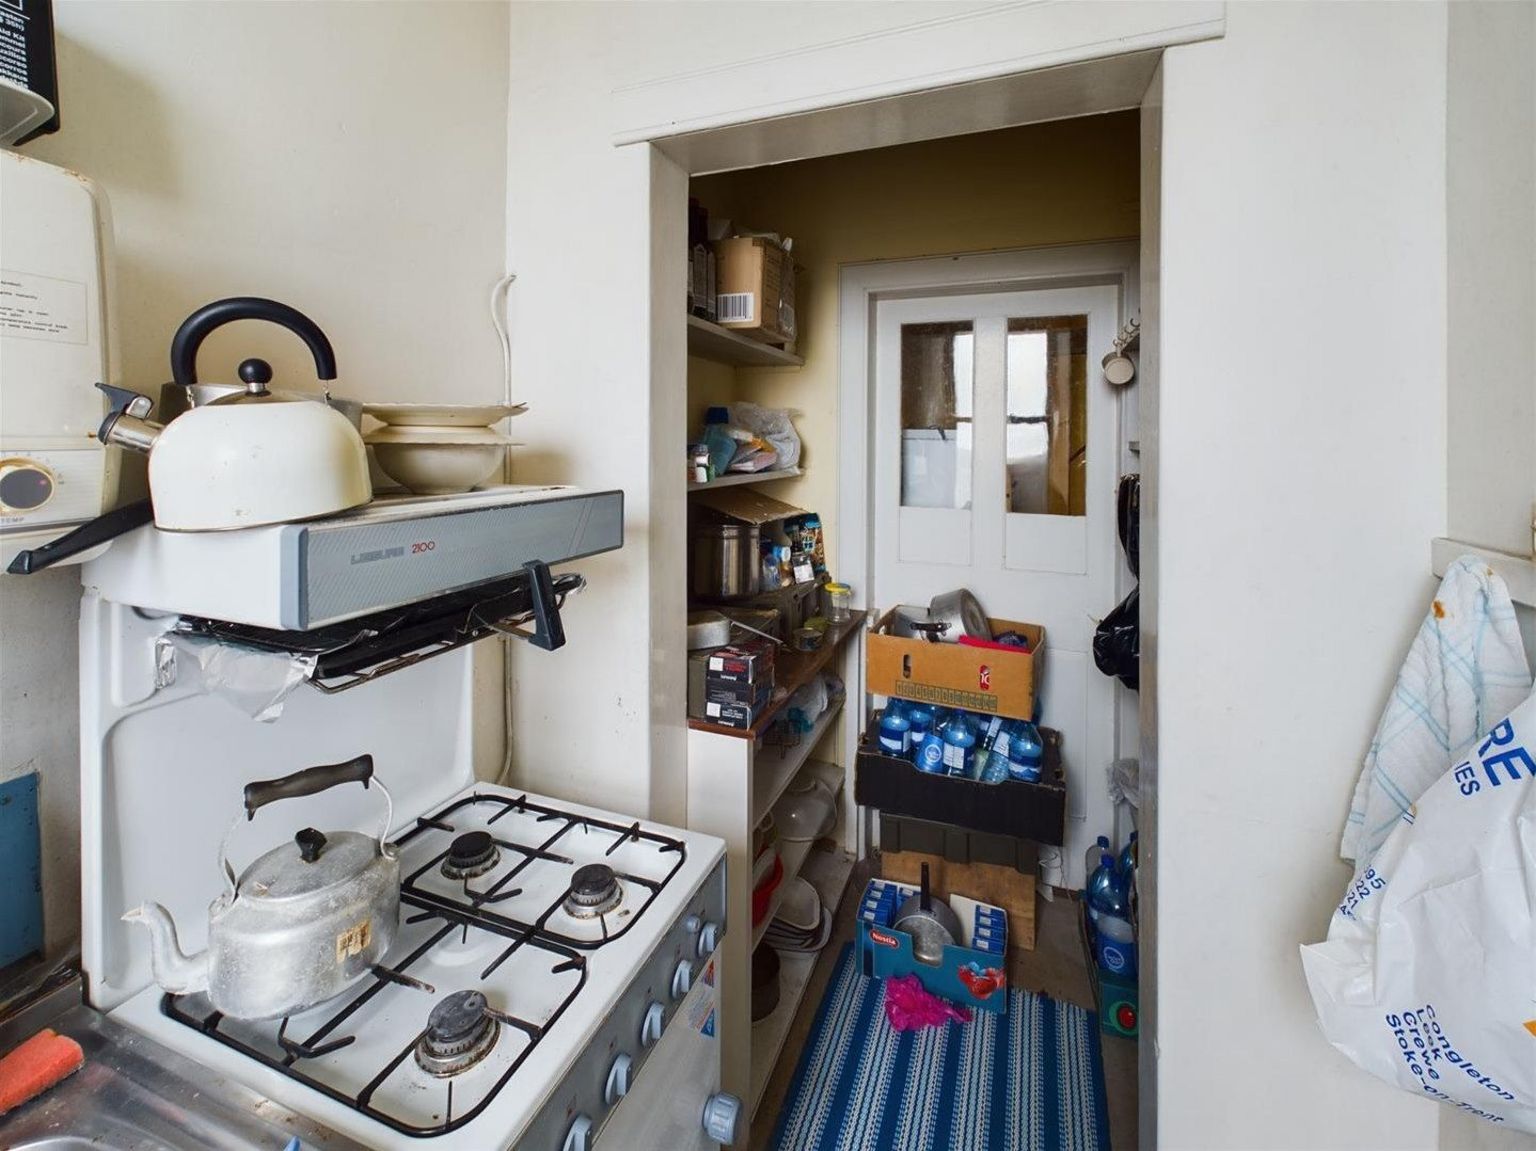 Interior of a small kitchen with a gas cooker